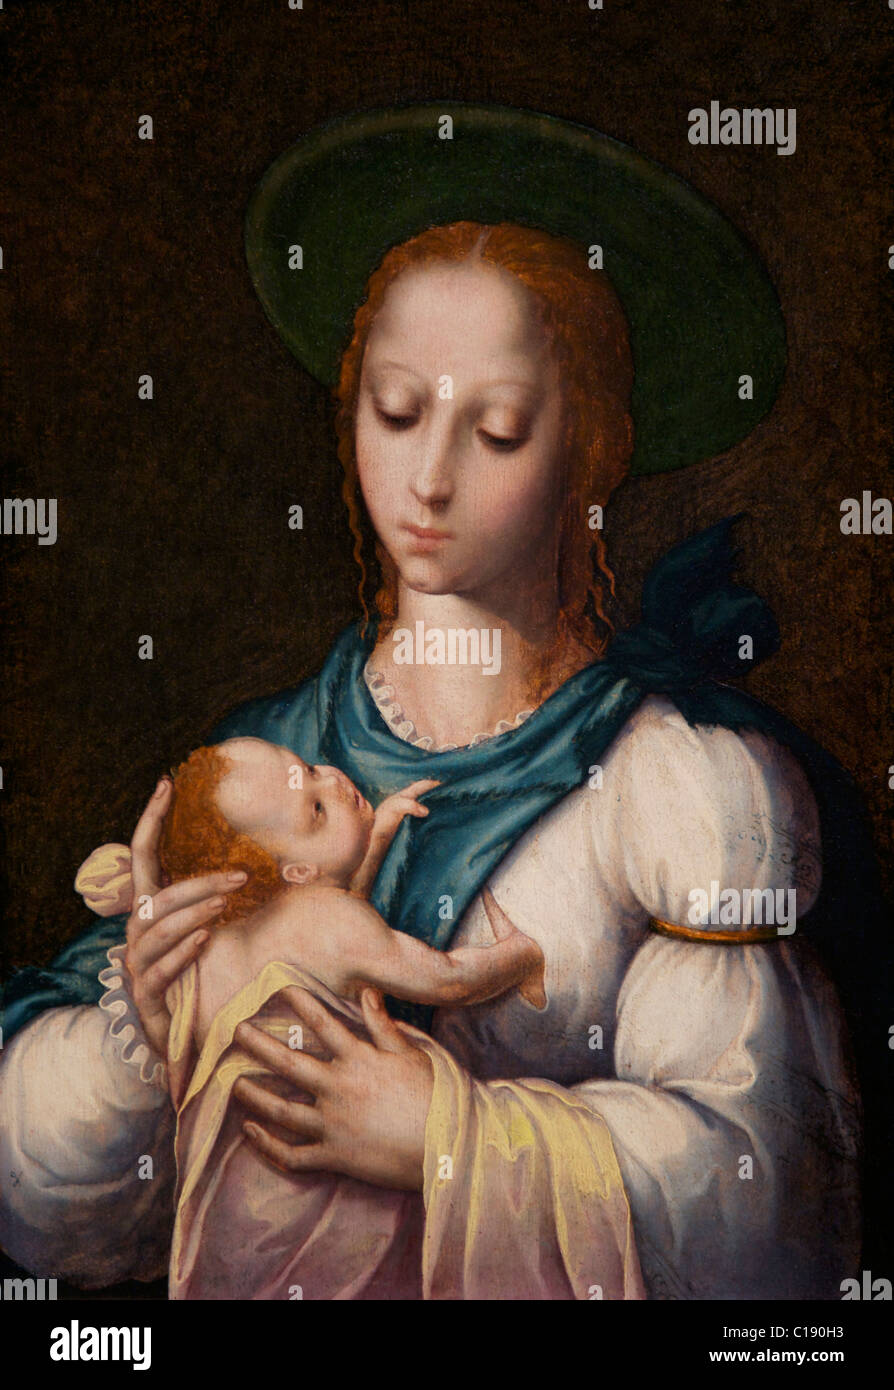 Virgin and Child, by Luis de Morales, 16th century, spanish, Ashmolean Museum of Art, University of Oxford, Oxfordshire, England Stock Photo